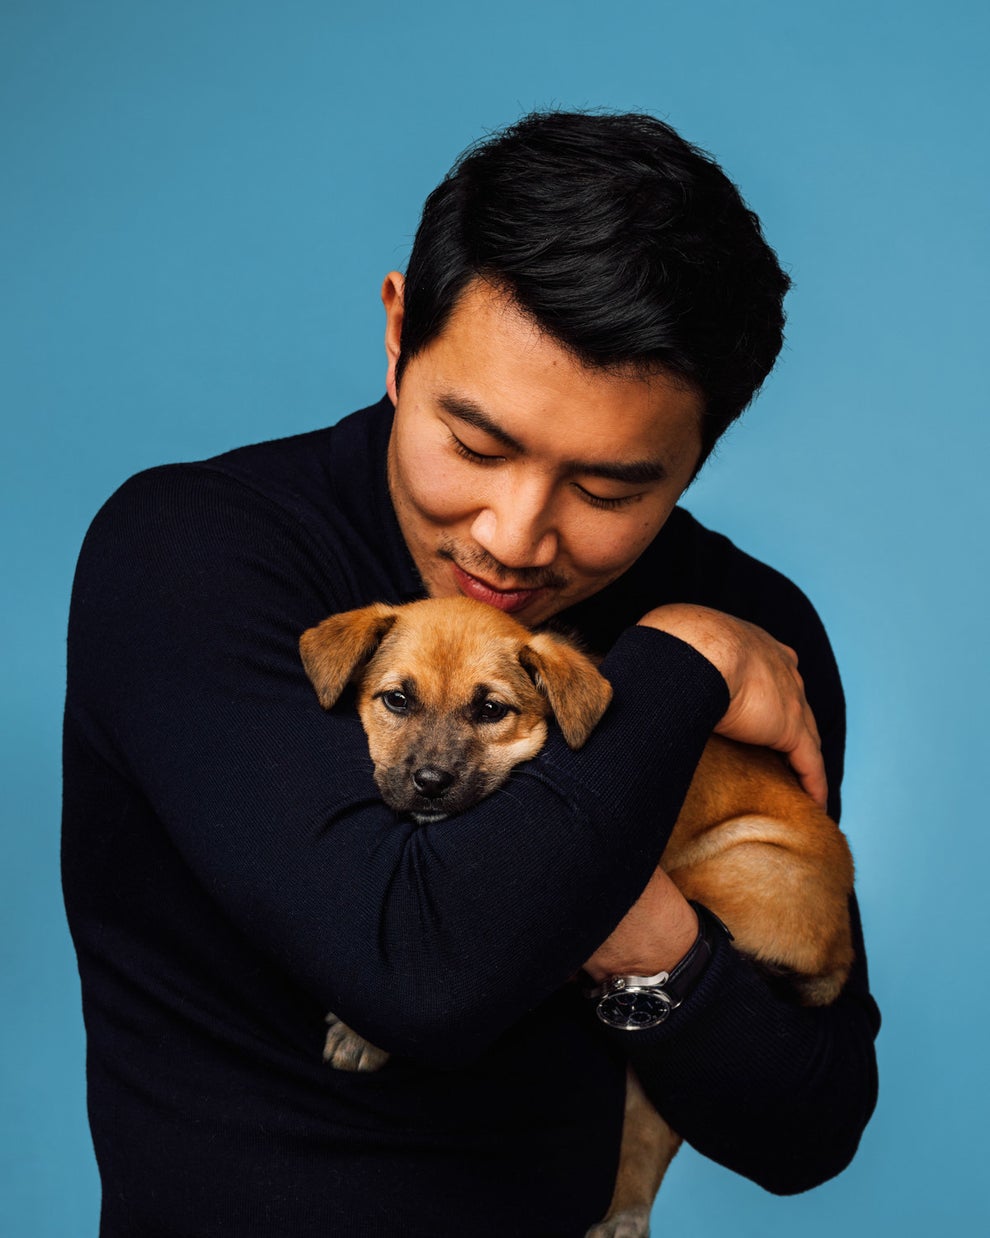 Simu Liu Answers Questions While Playing With Puppies